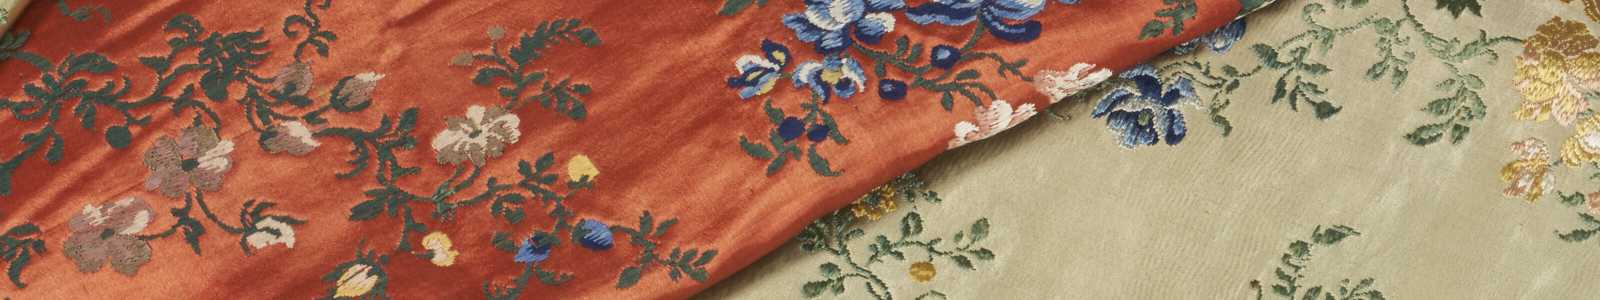 The Ann & Gordon Getty Collection: Chinese and Japanese Works of Art and Textiles